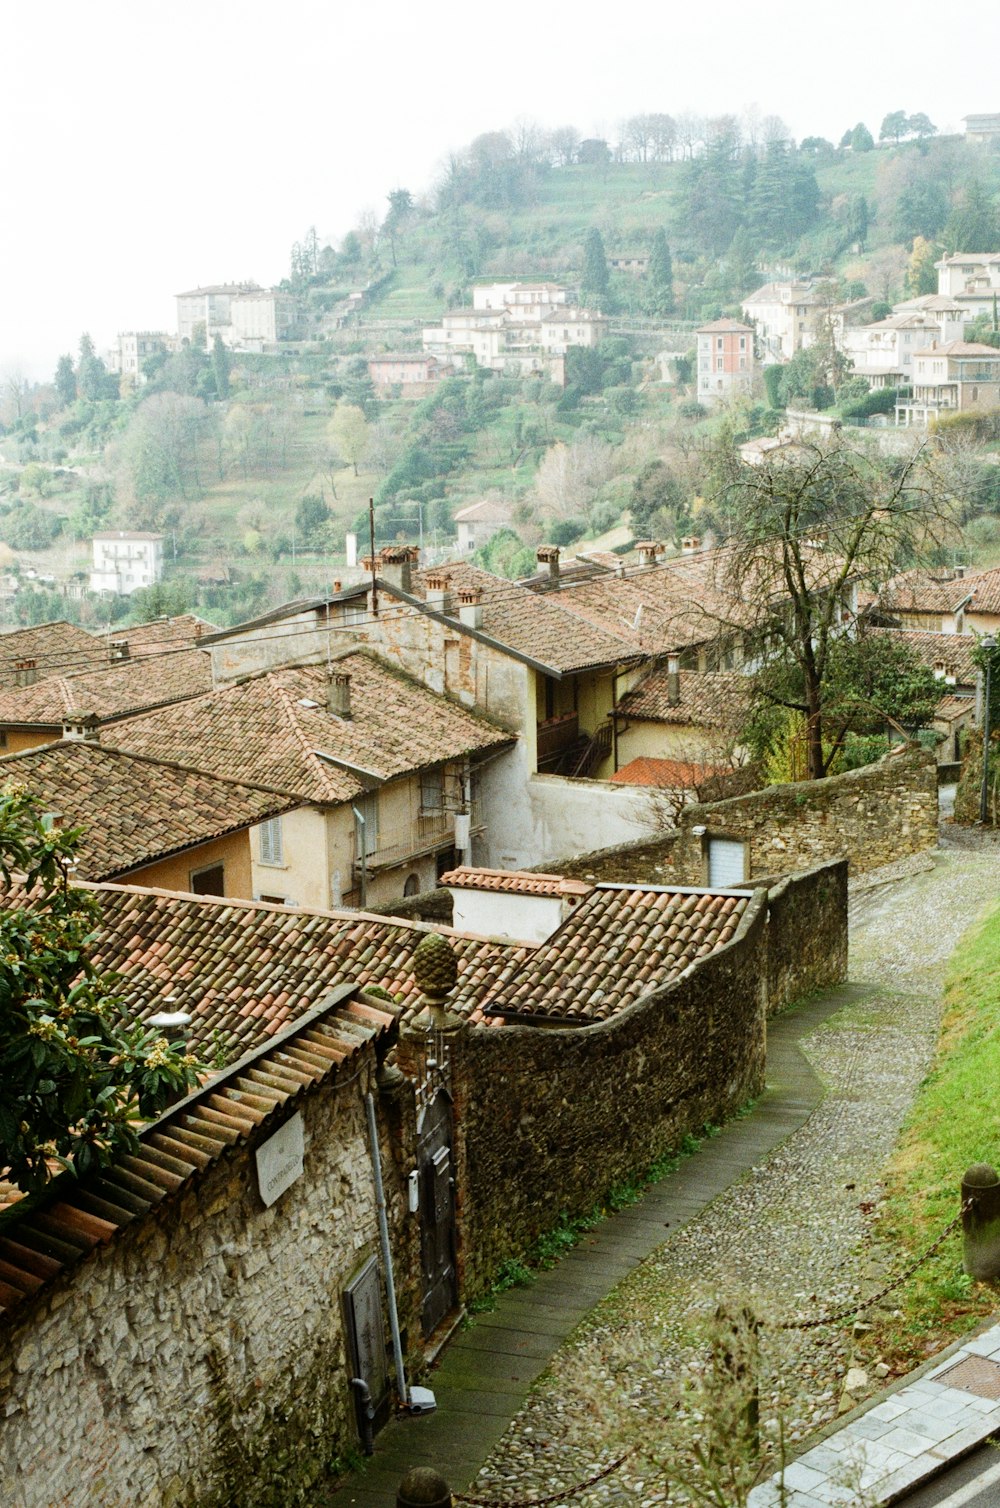 a view of a village from a hill